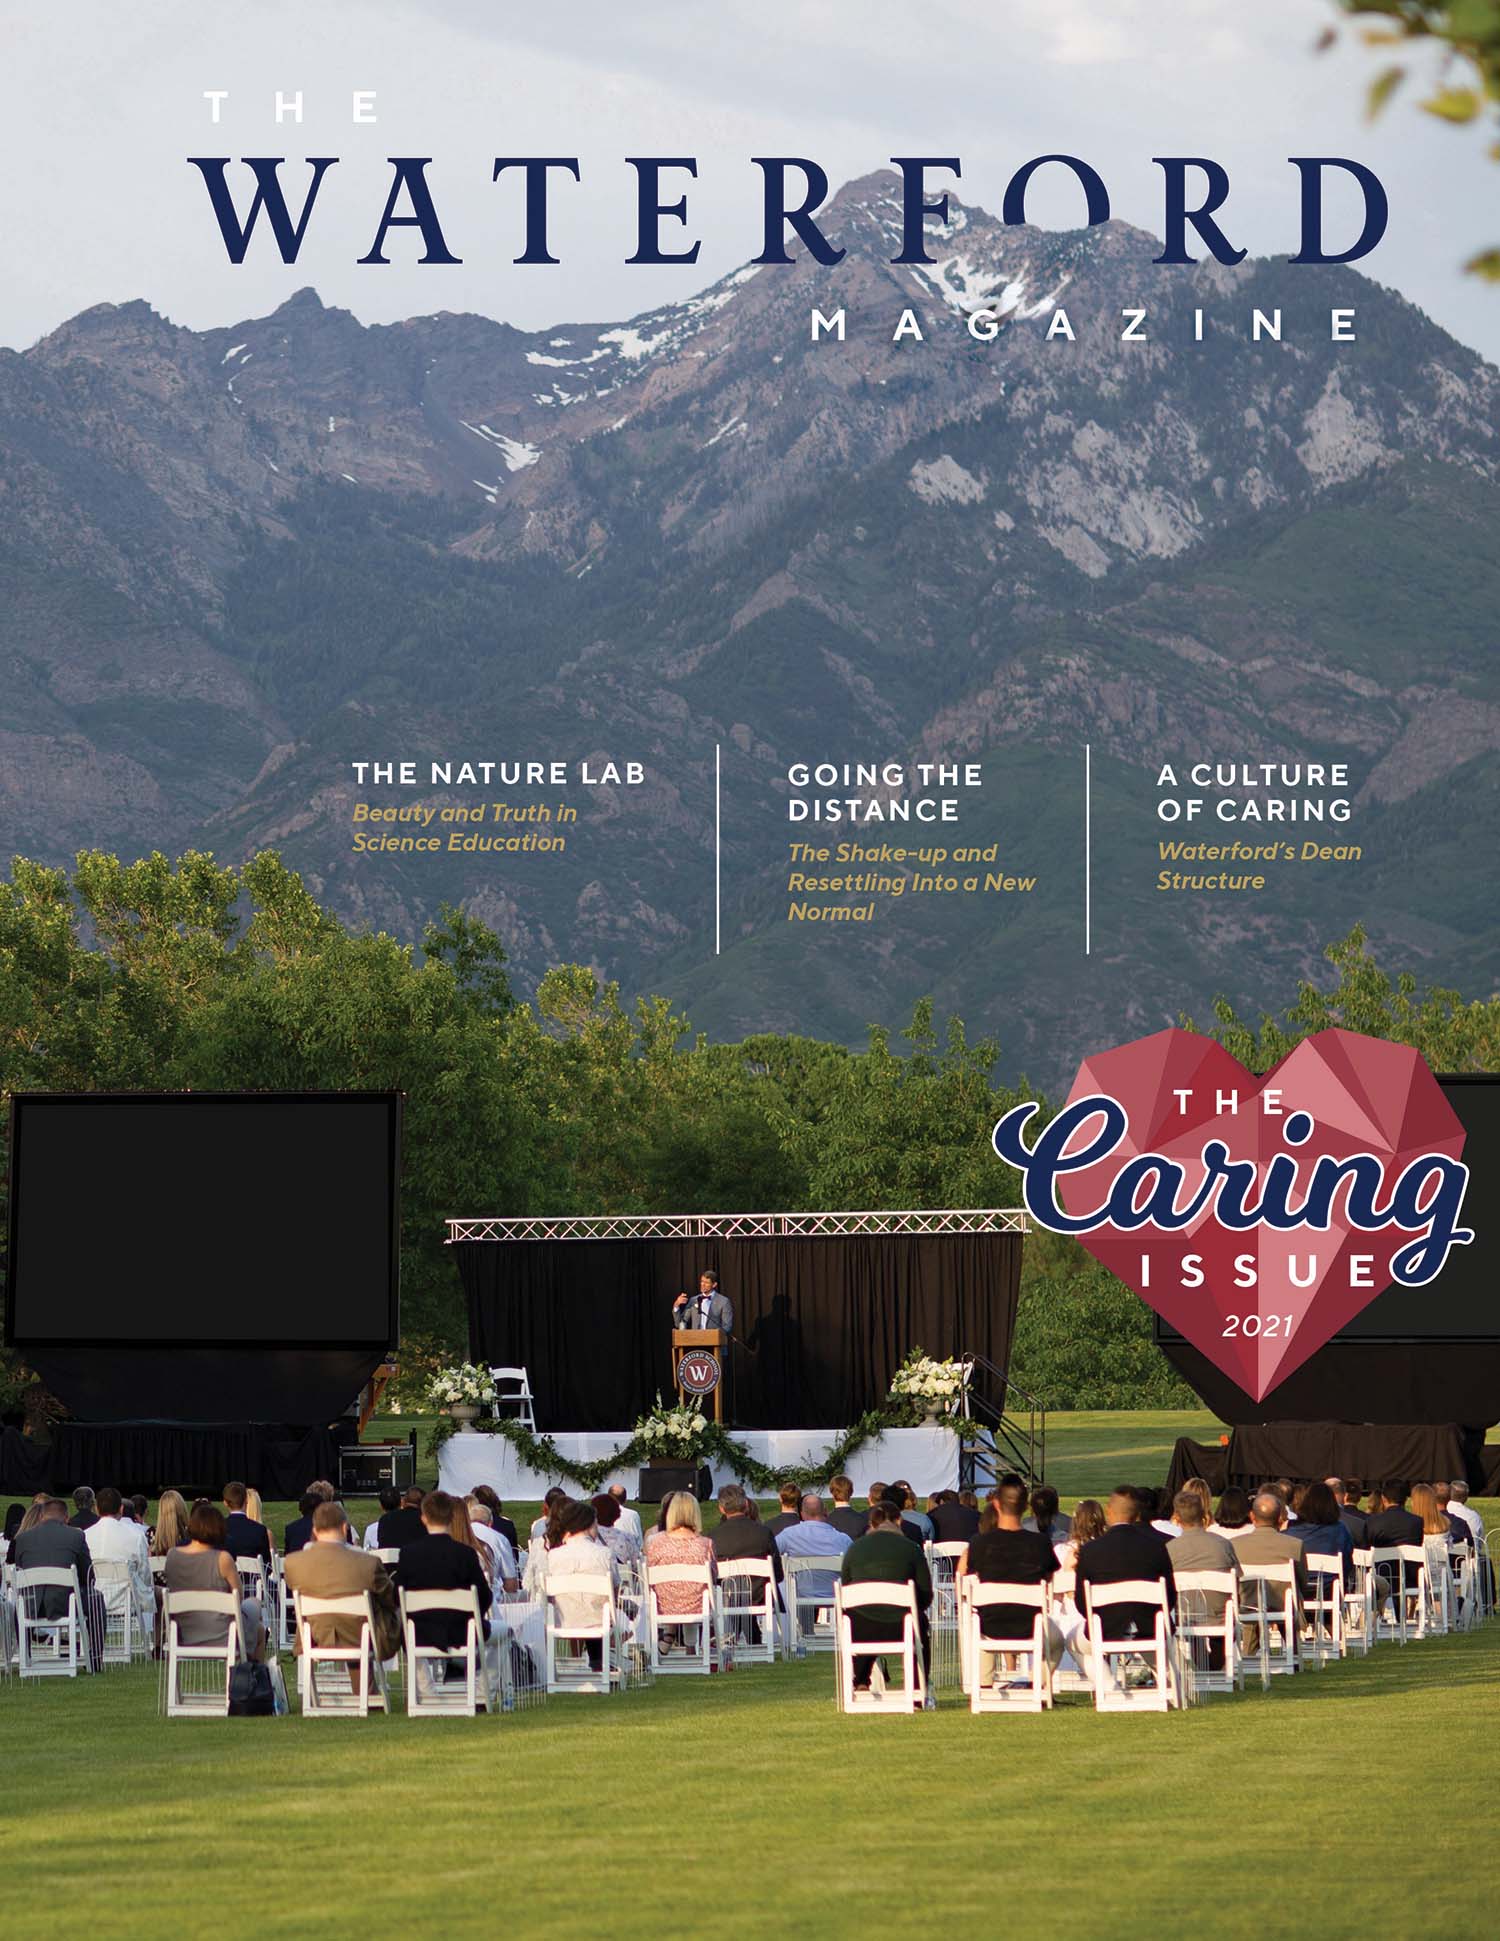 The Waterford Magazine | The Caring Issue | 2021